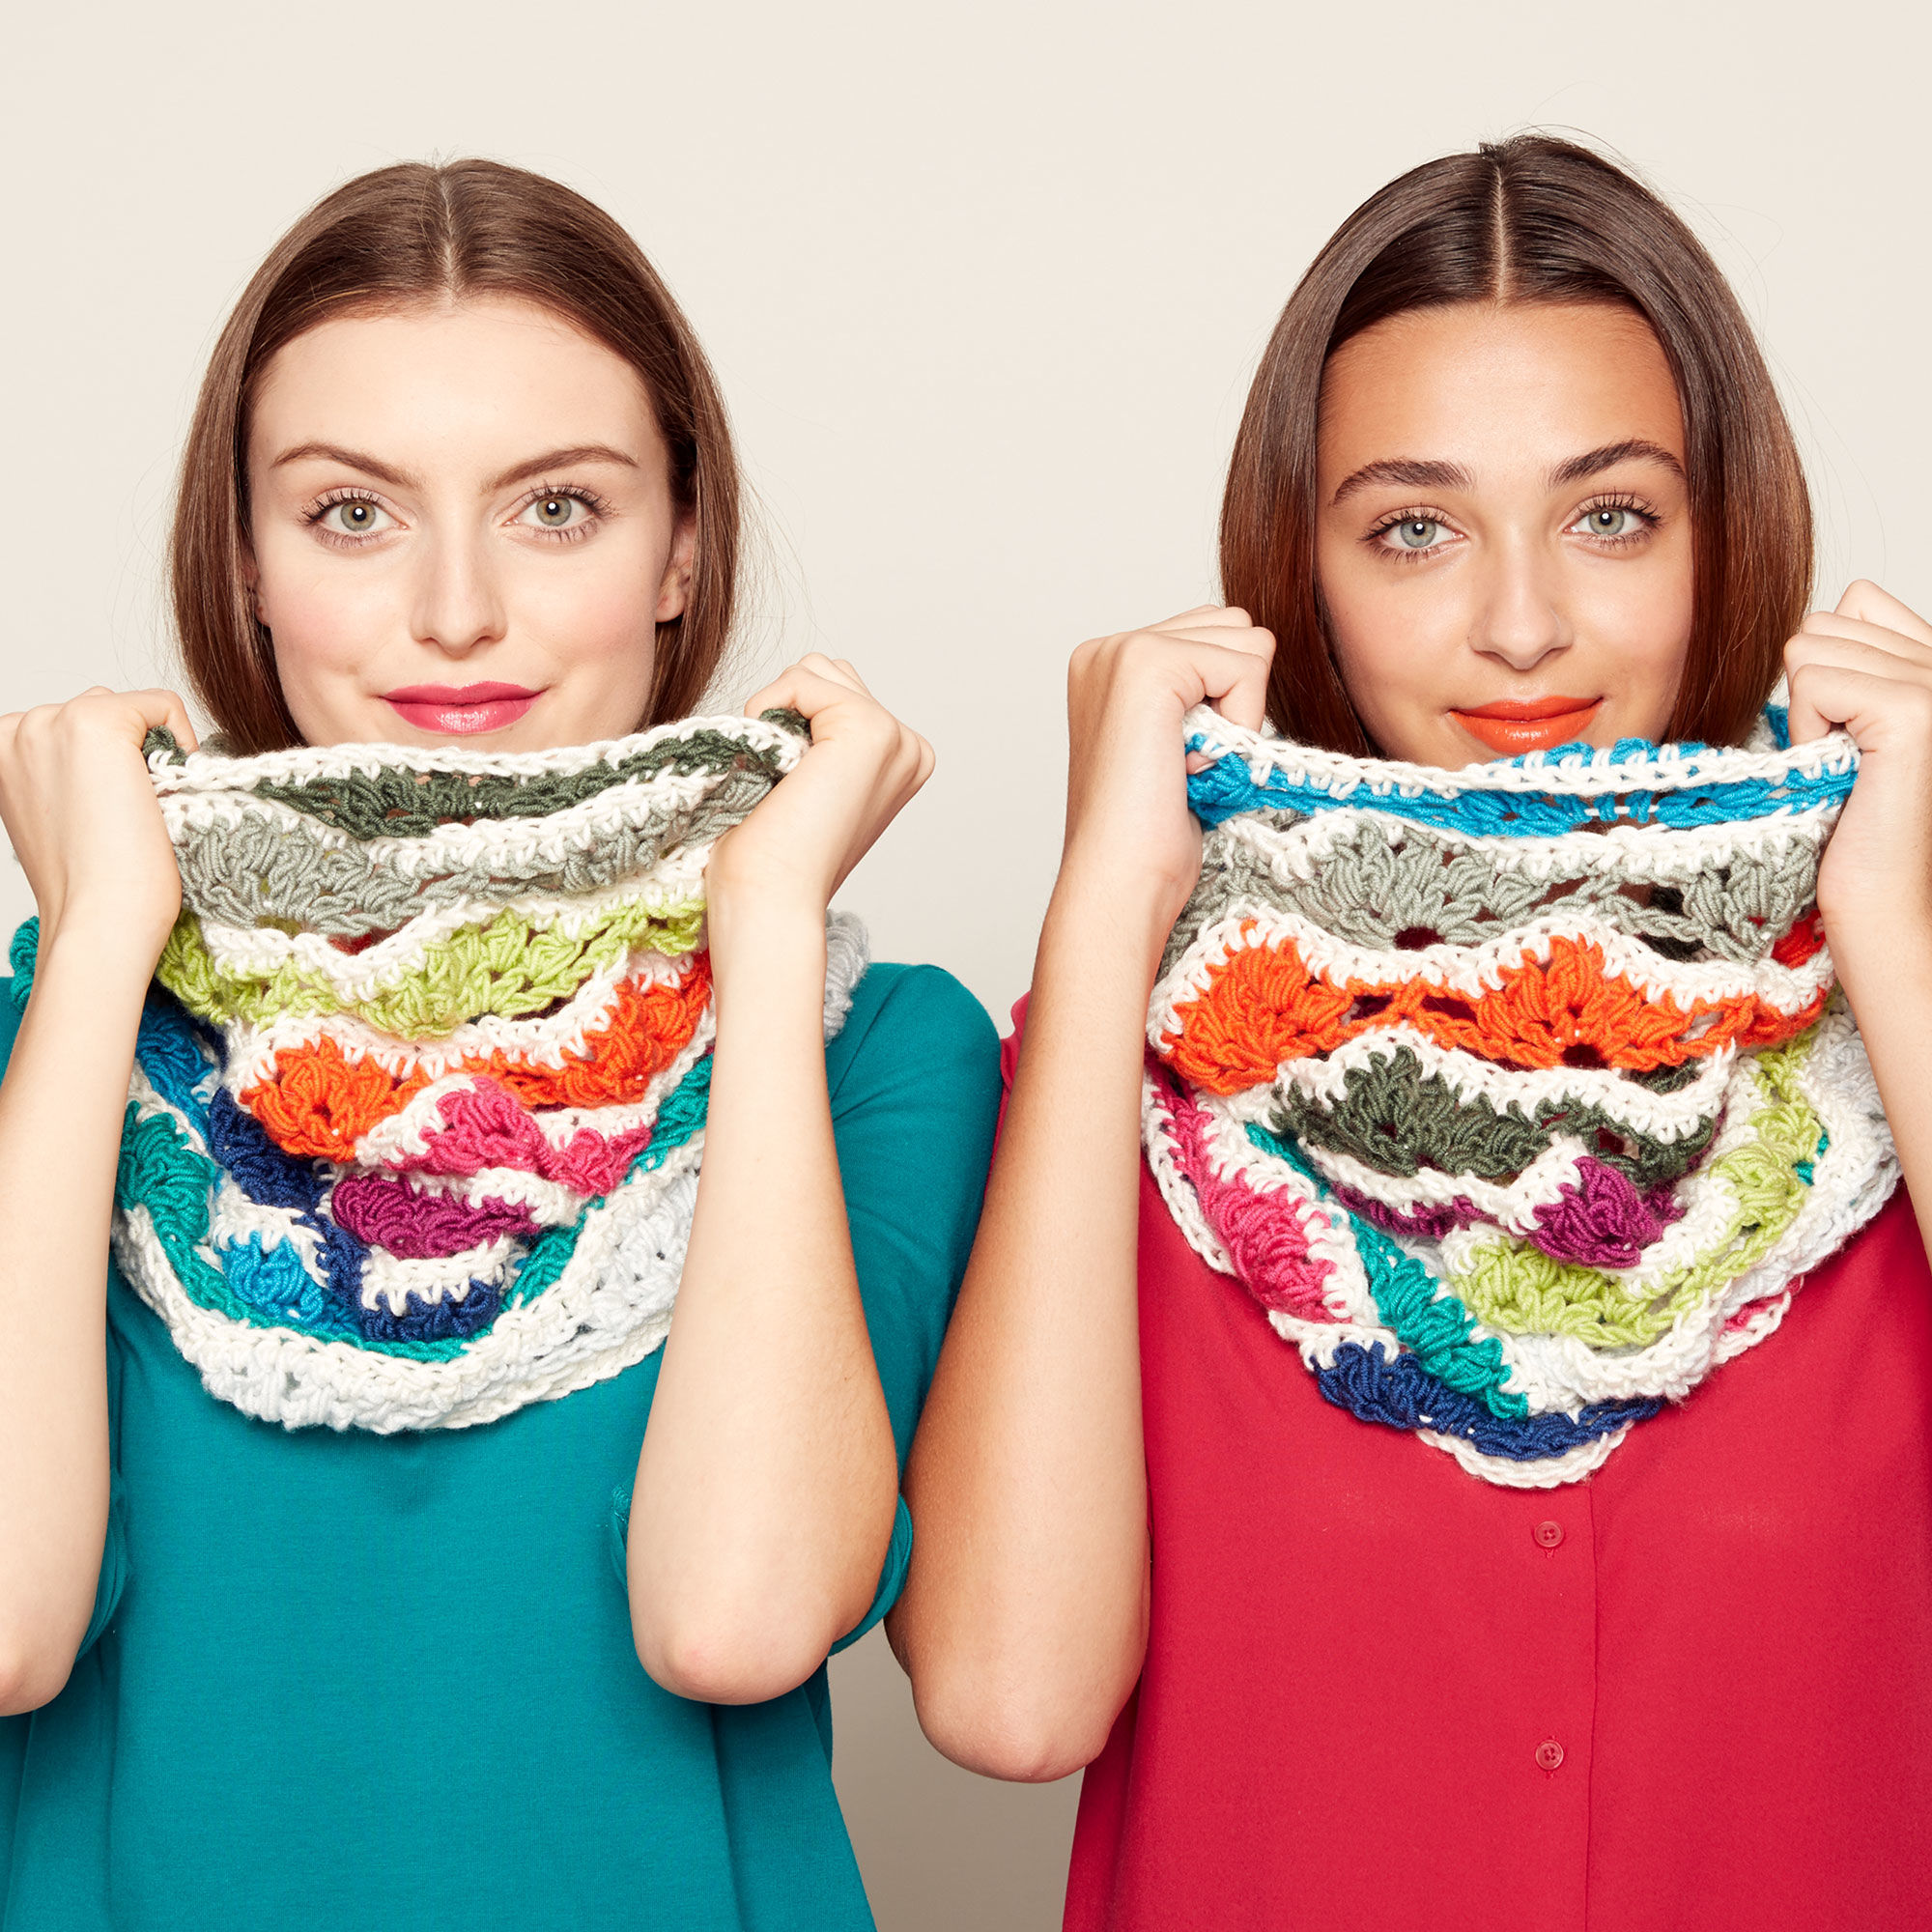 Free Crochet Pattern for a Rainbow Chip Pantone Cowl